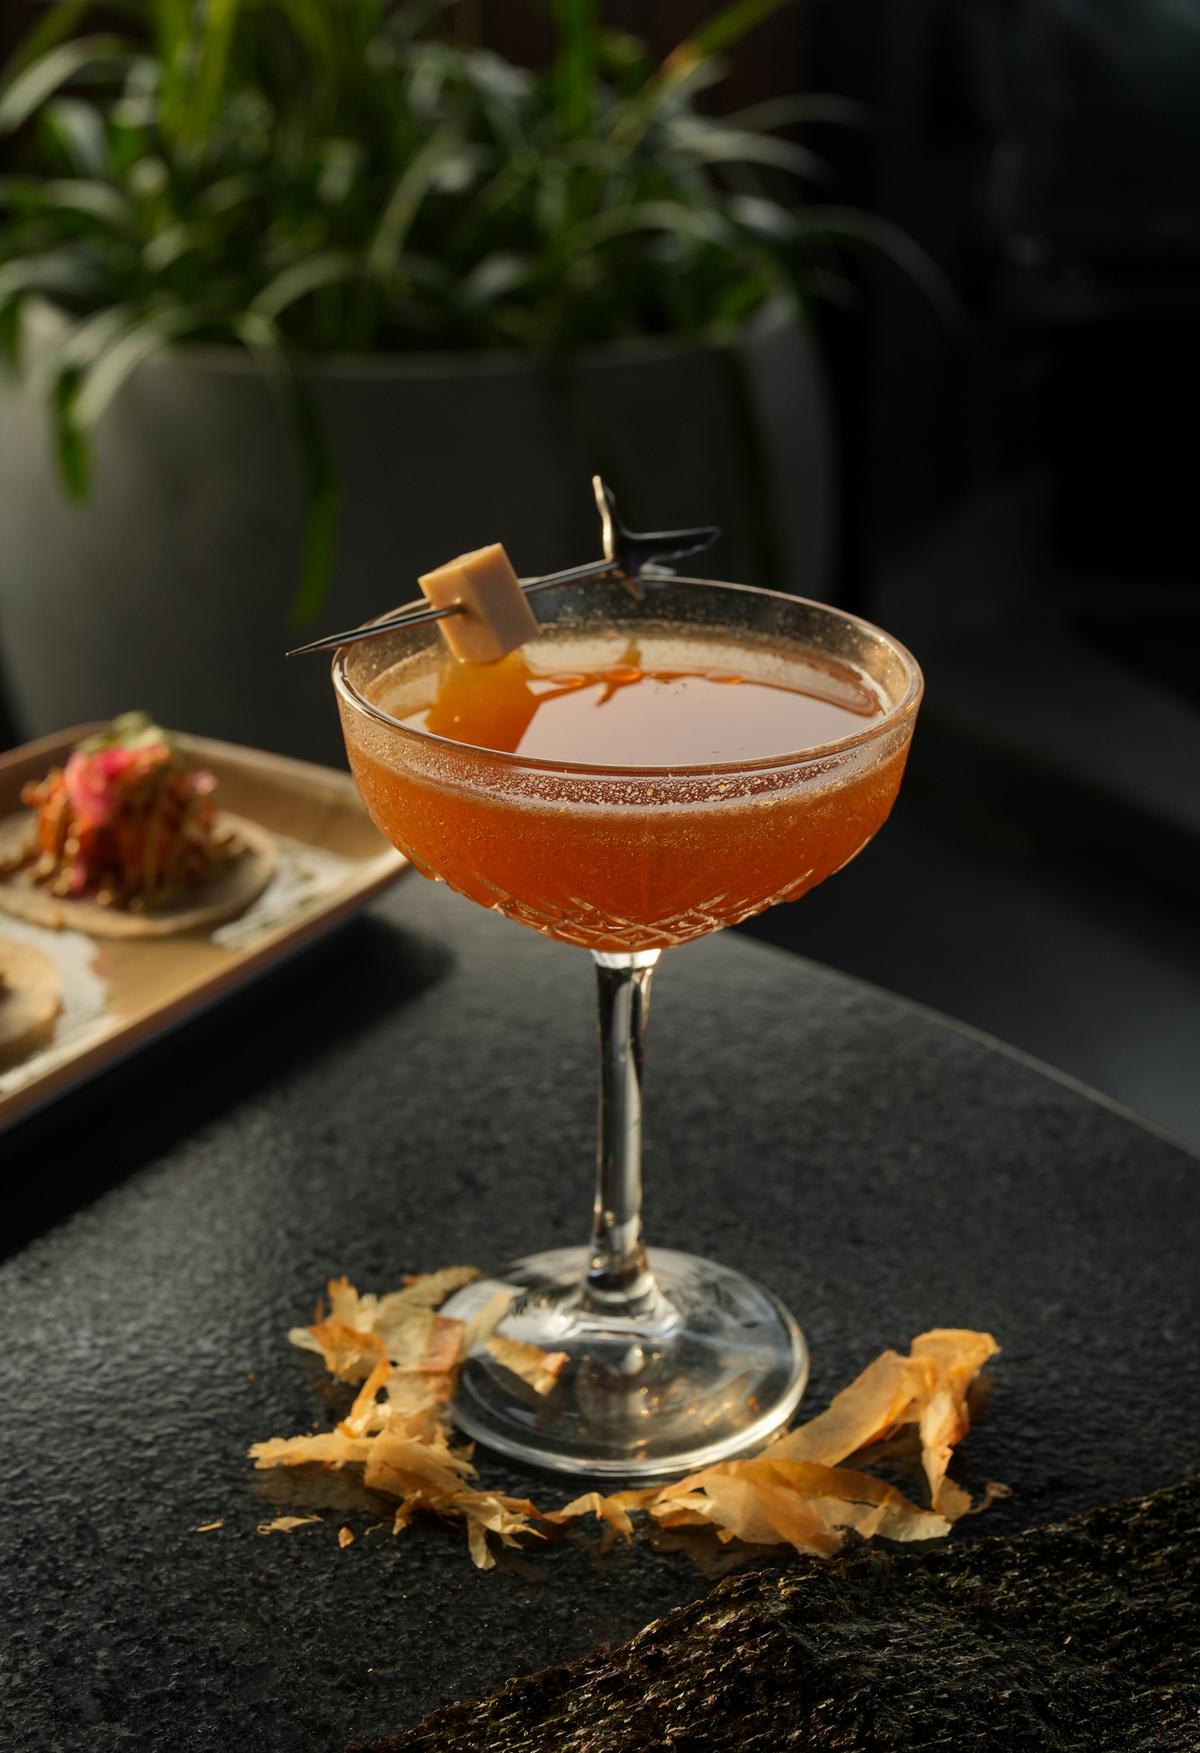 Miso Hot, a cocktail made with shiitake-infused whisky